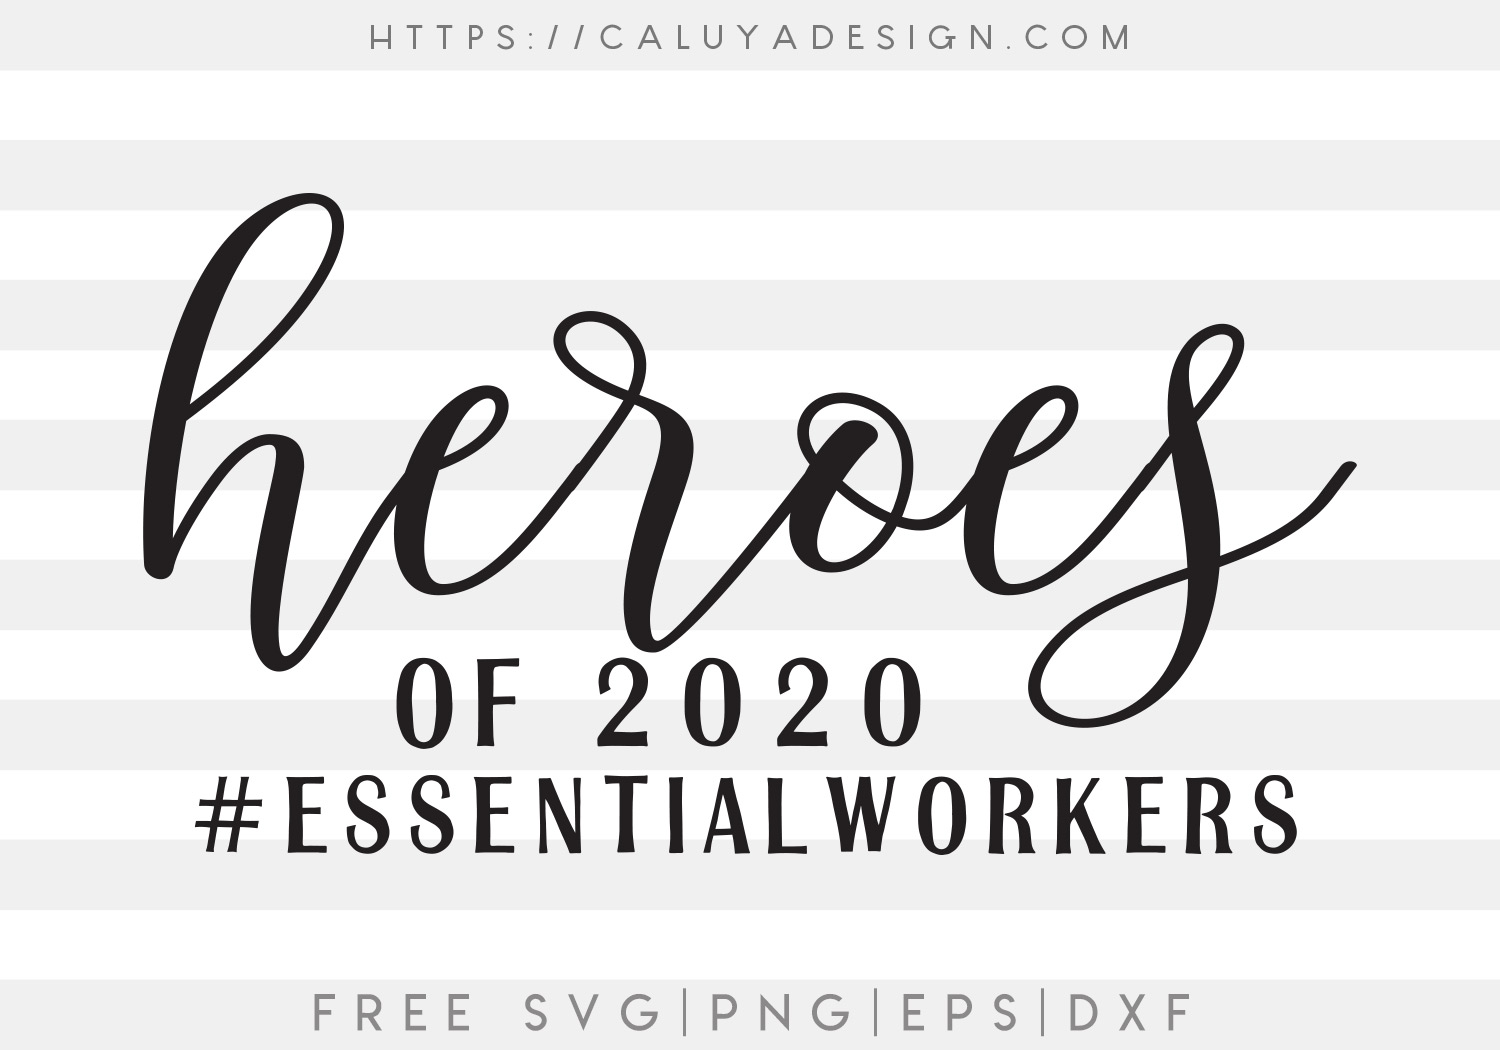 Heroes of 2020 SVG, PNG, EPS & DXF